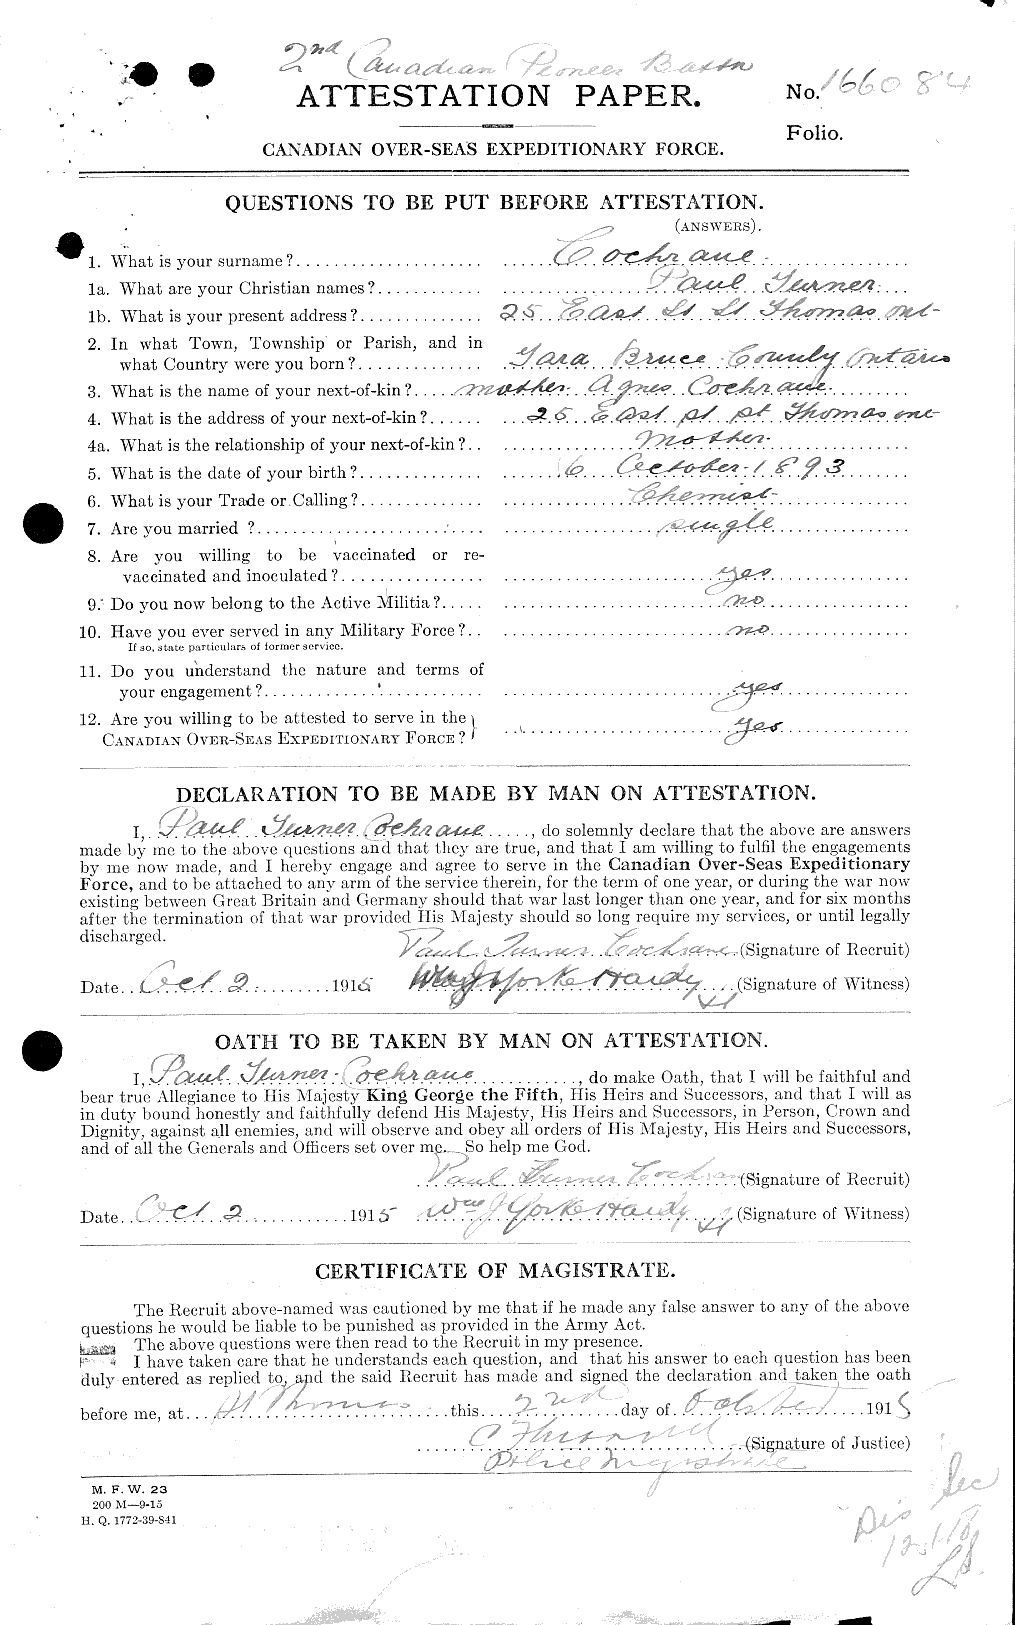 Personnel Records of the First World War - CEF 026440a